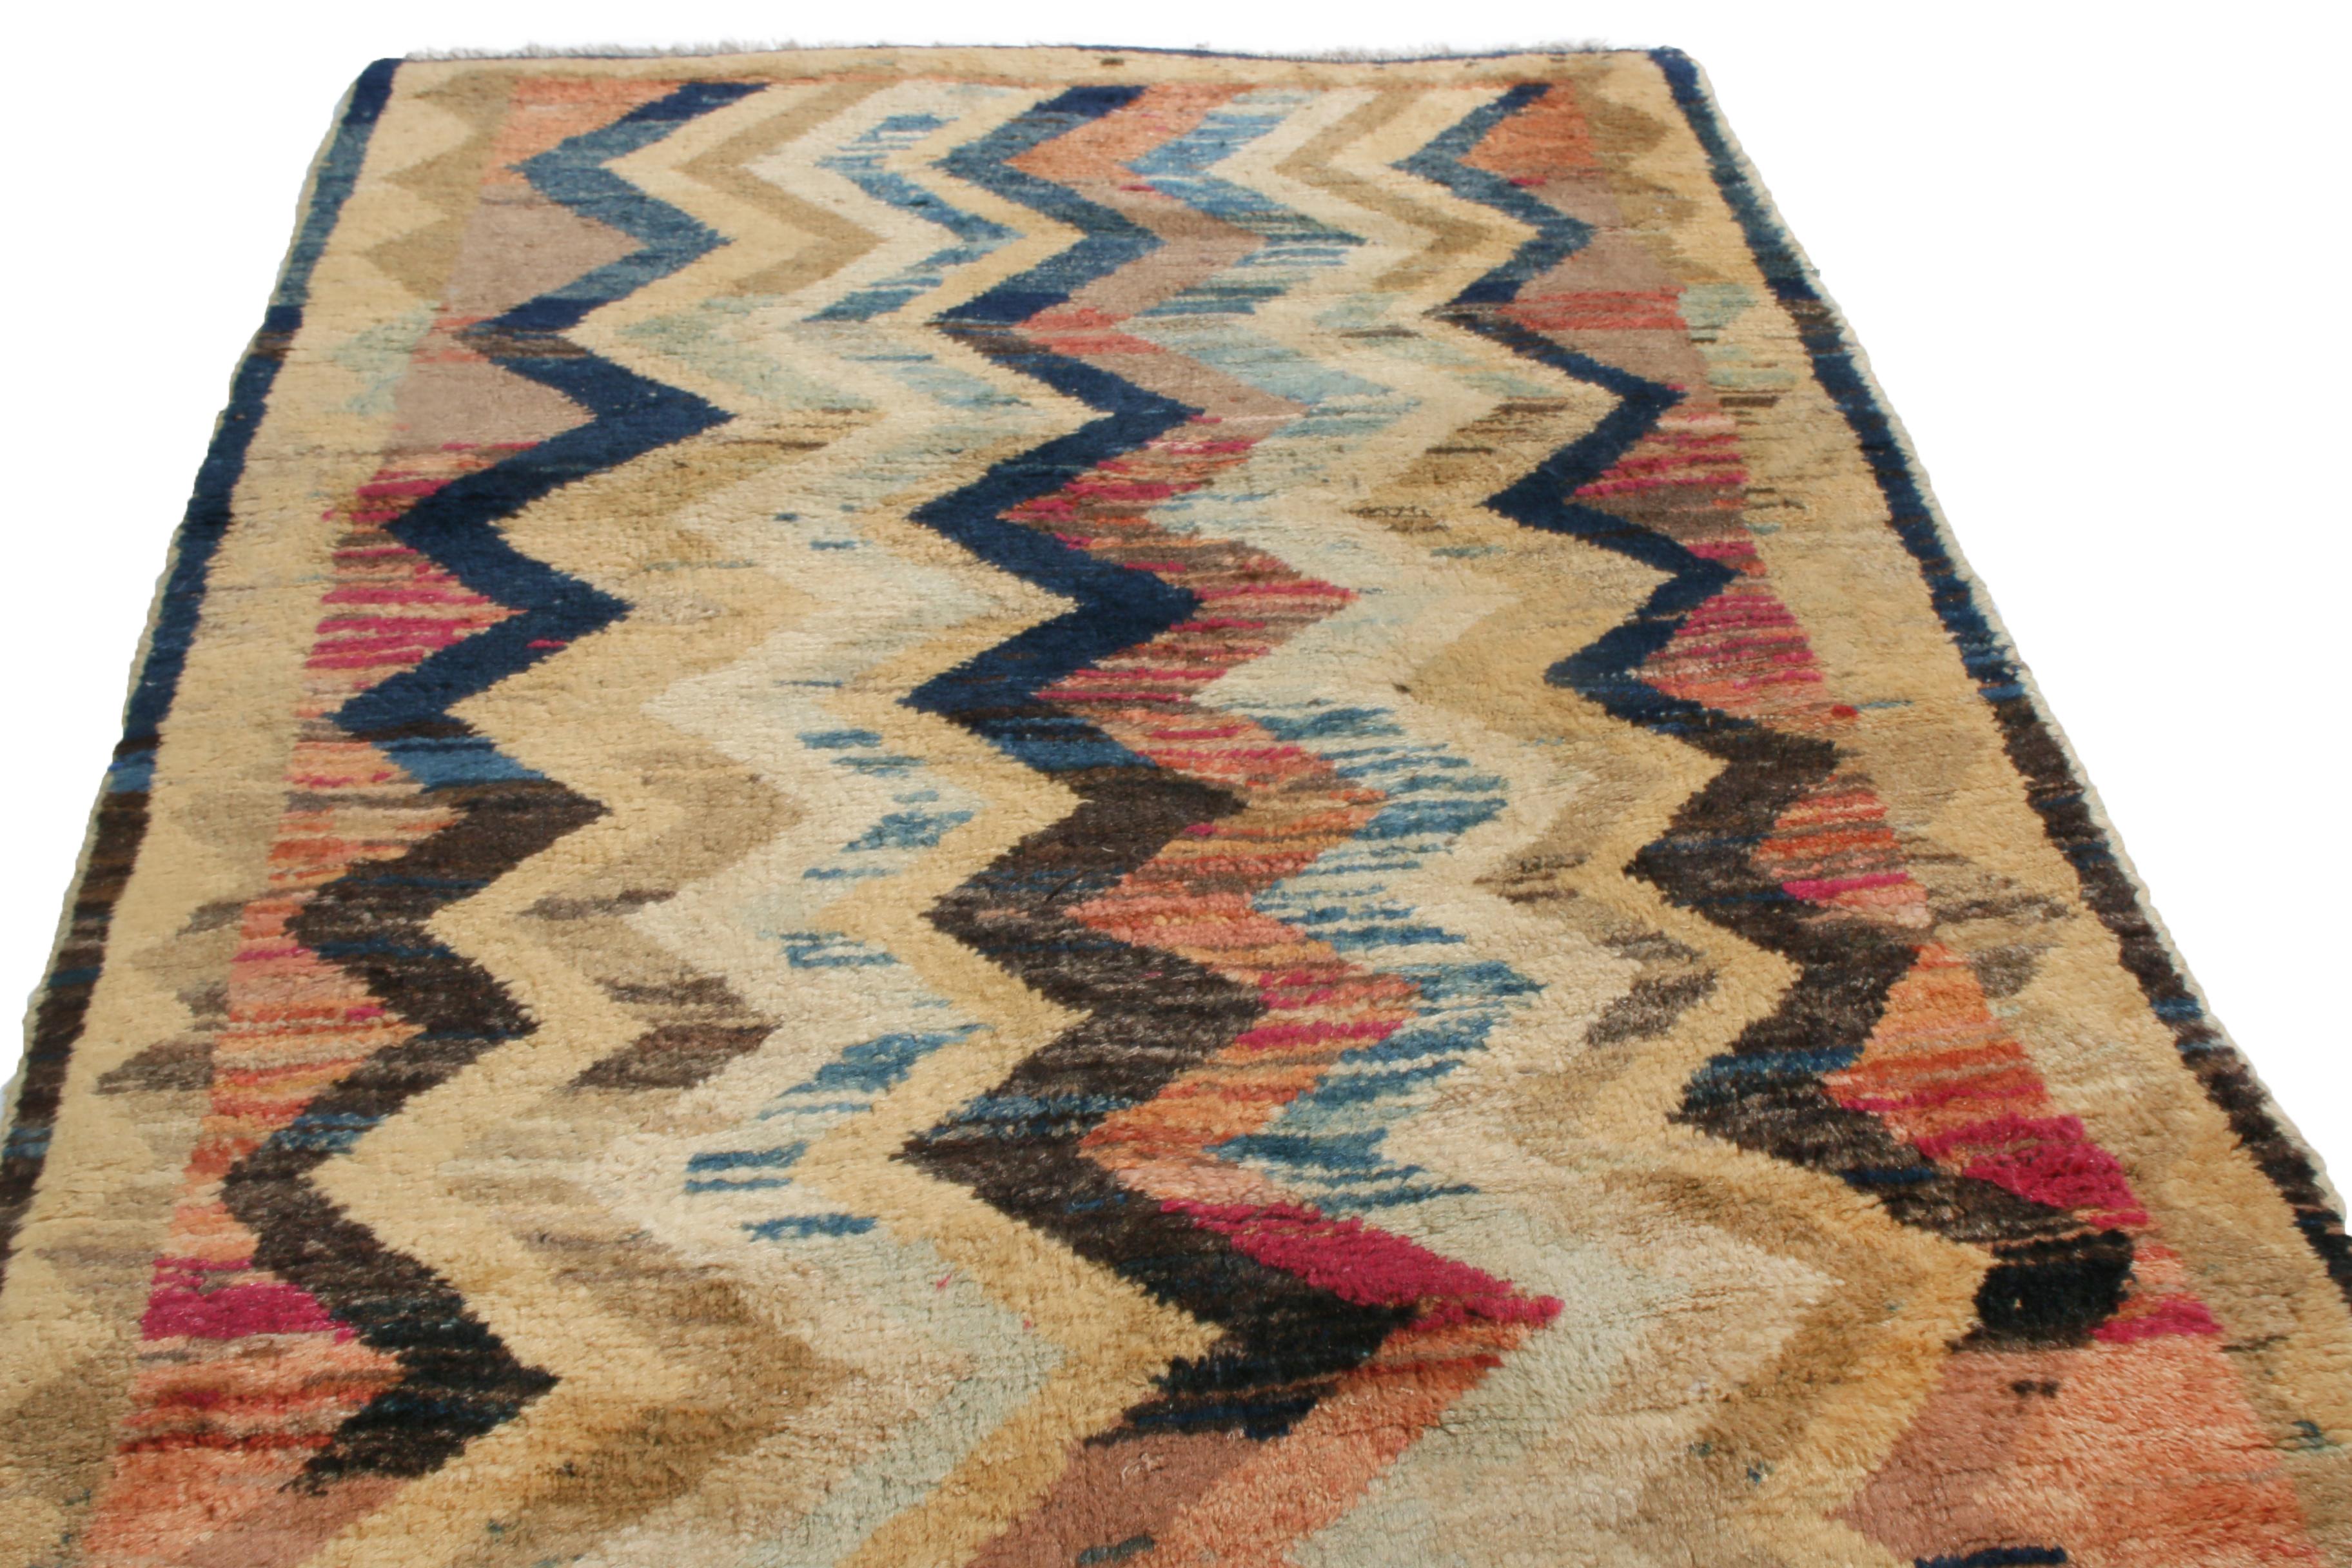 Originating from Persia in 1940, this vintage transitional Gabbeh wool rug features an uncommon series of colourways in a tribal chevron pattern. Hand knotted in high quality, very silky and luminous wool, each Gabbeh piece has a sense of